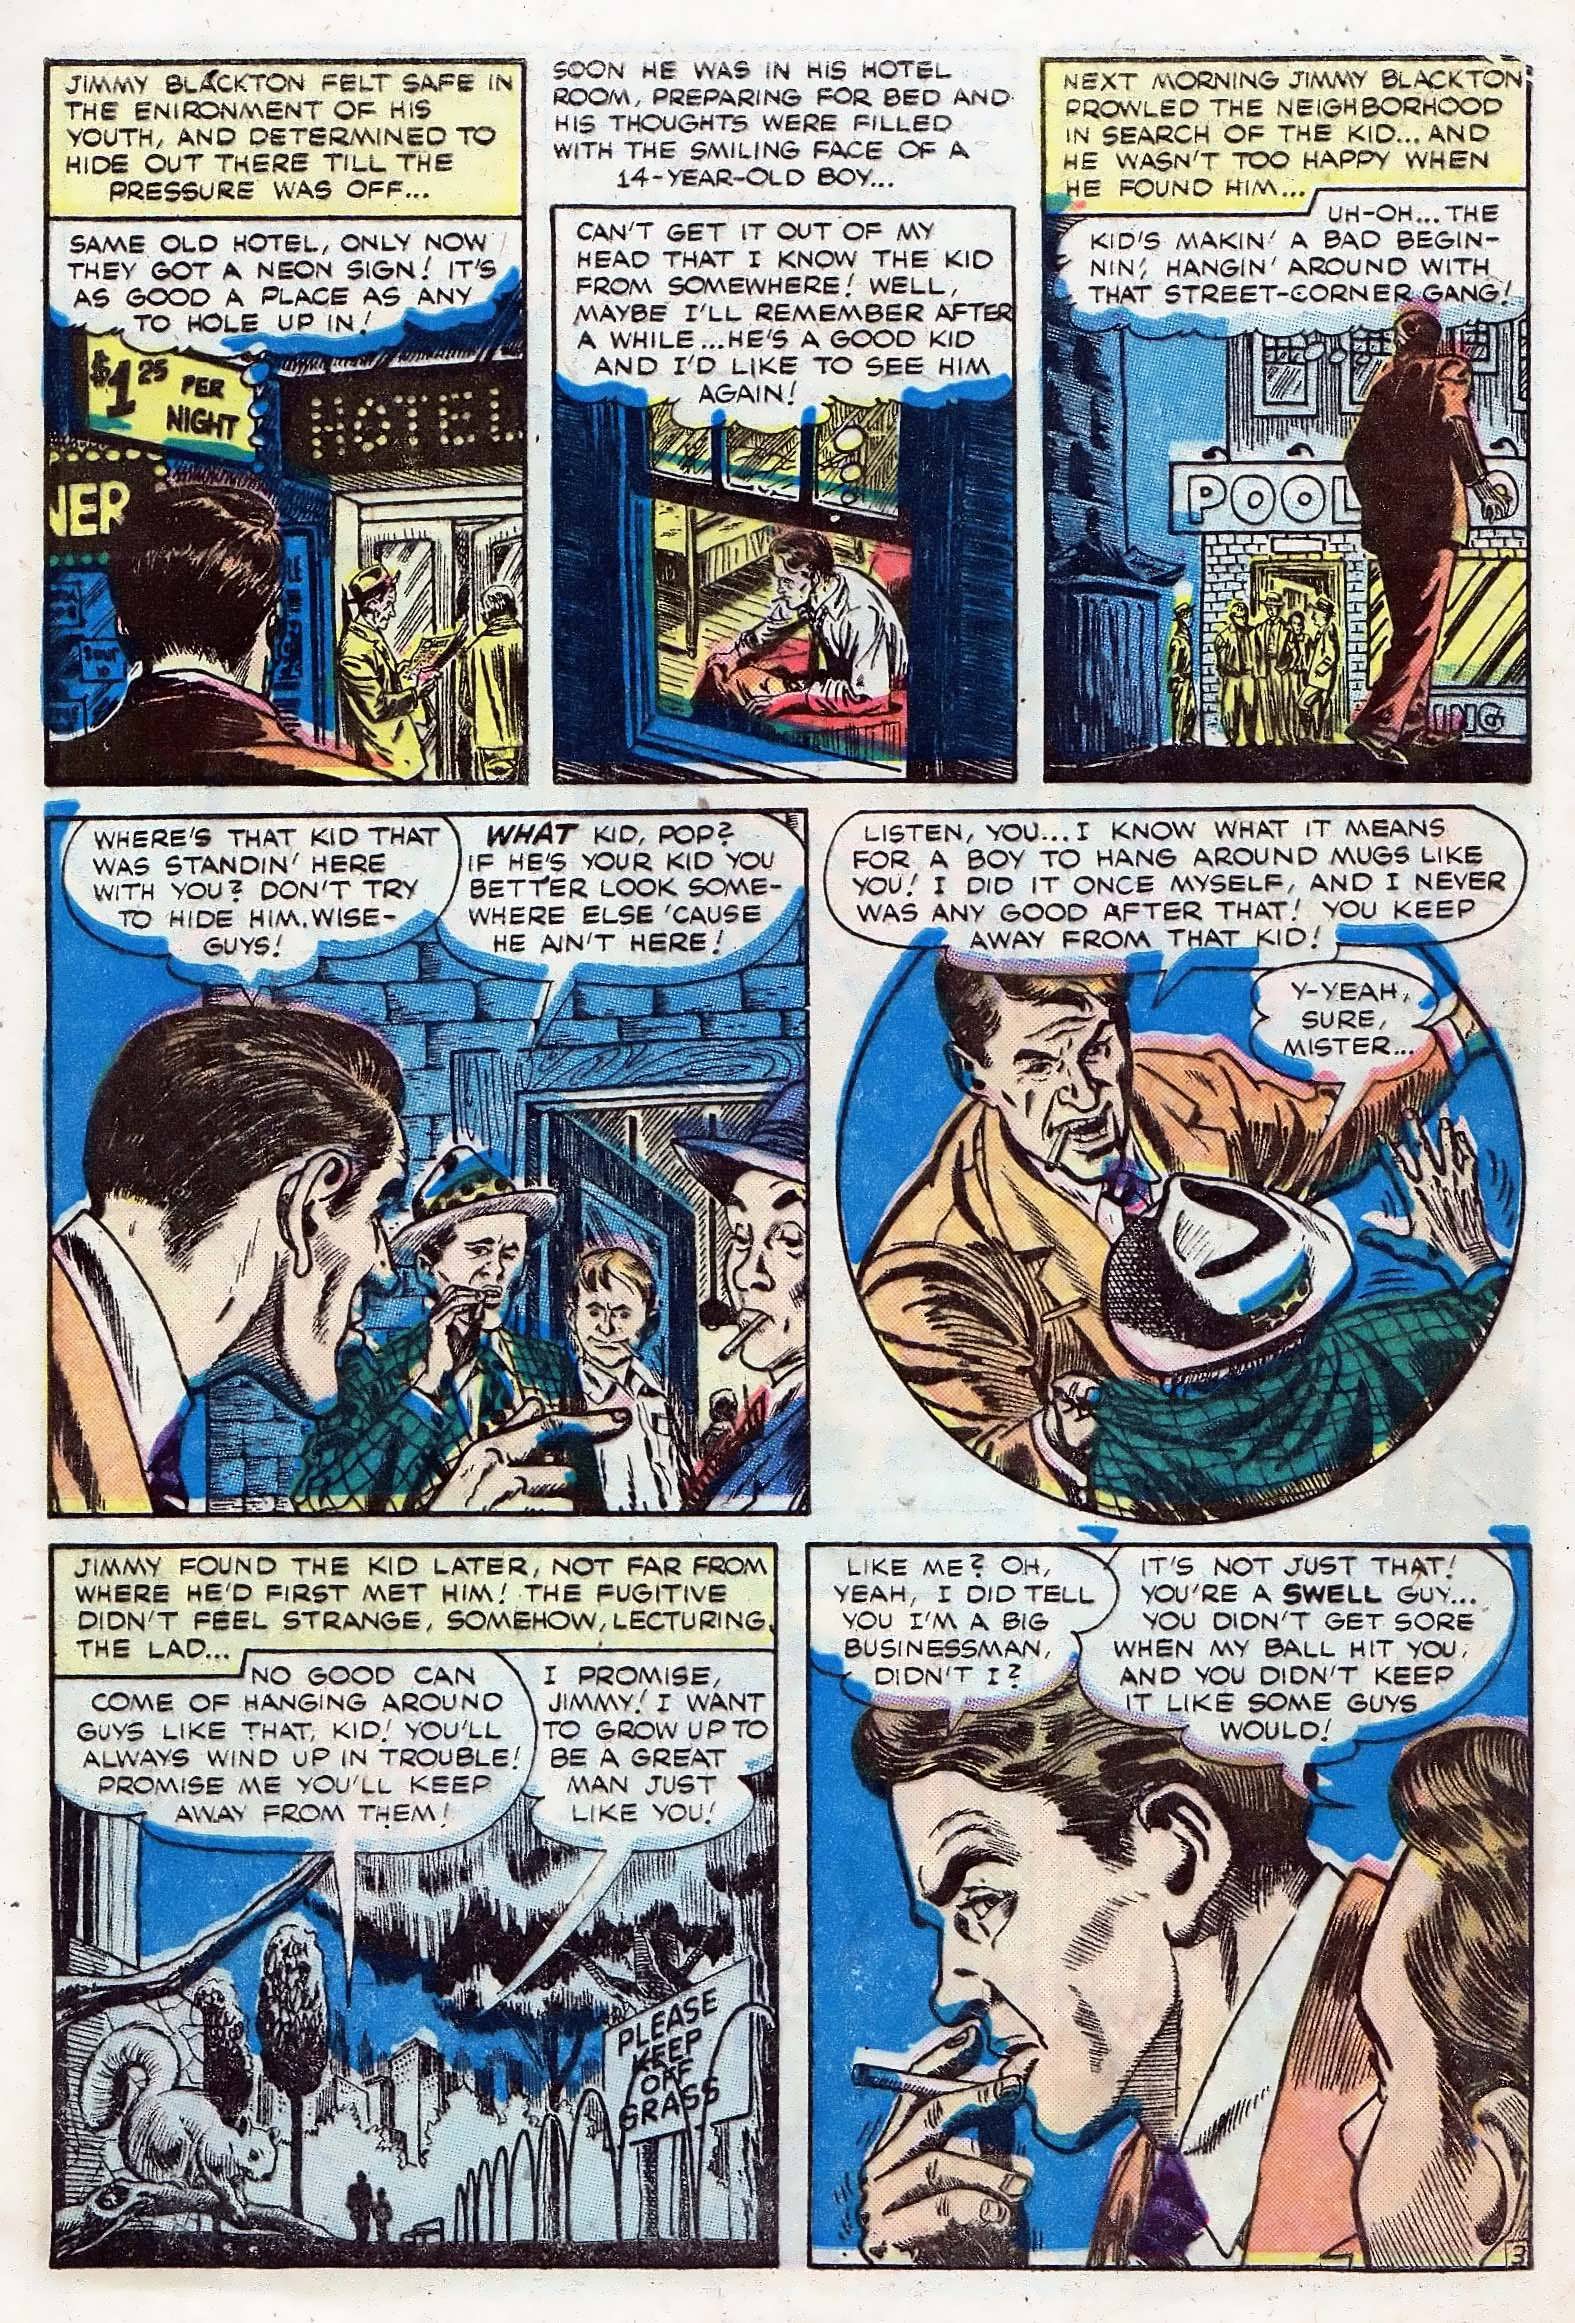 Marvel Tales (1949) 142 Page 4